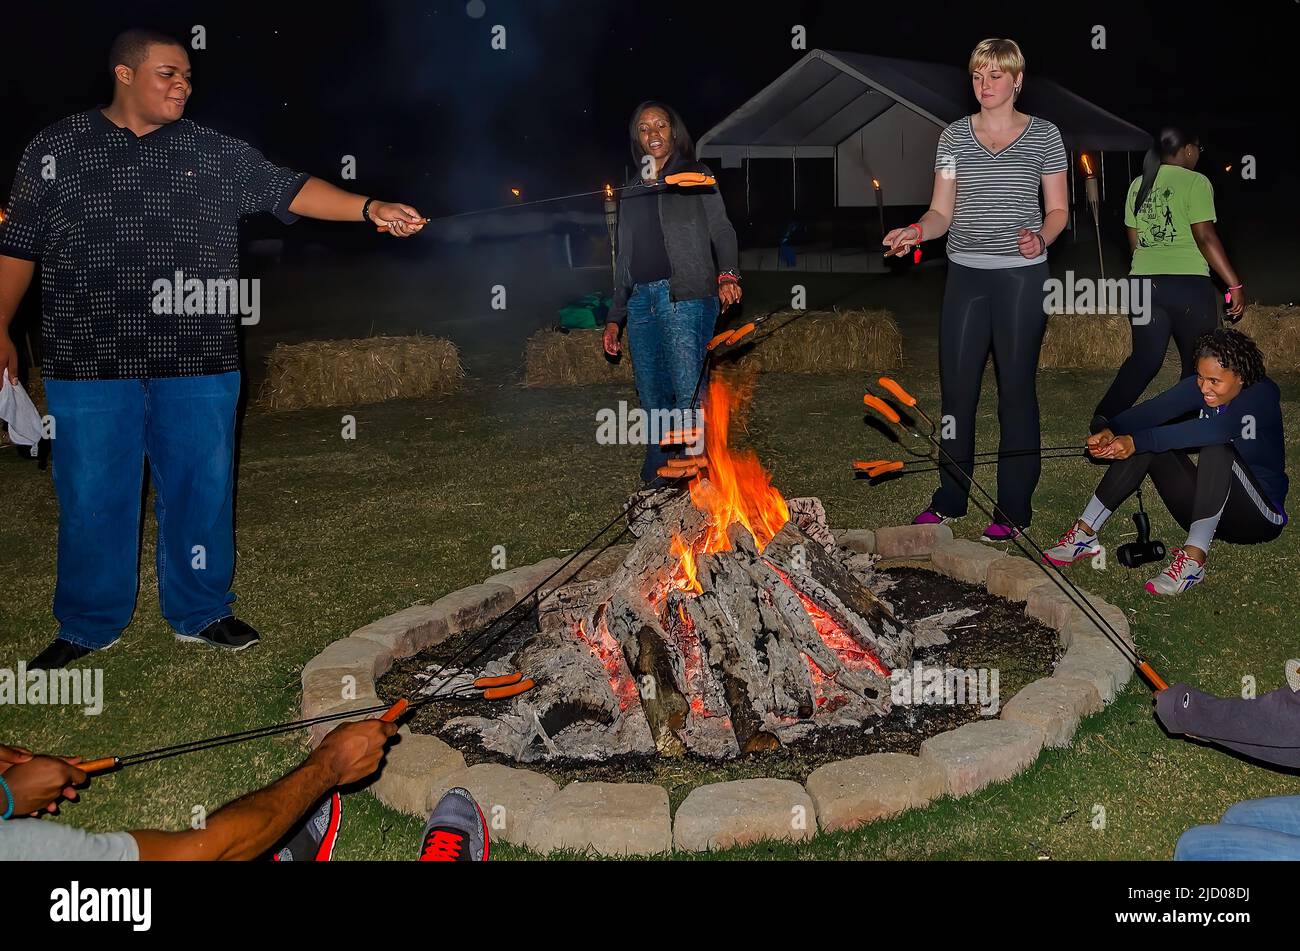 People roast wieners over a bonfire, Sept. 25, 2012, in Caledonia, Mississippi. Stock Photo